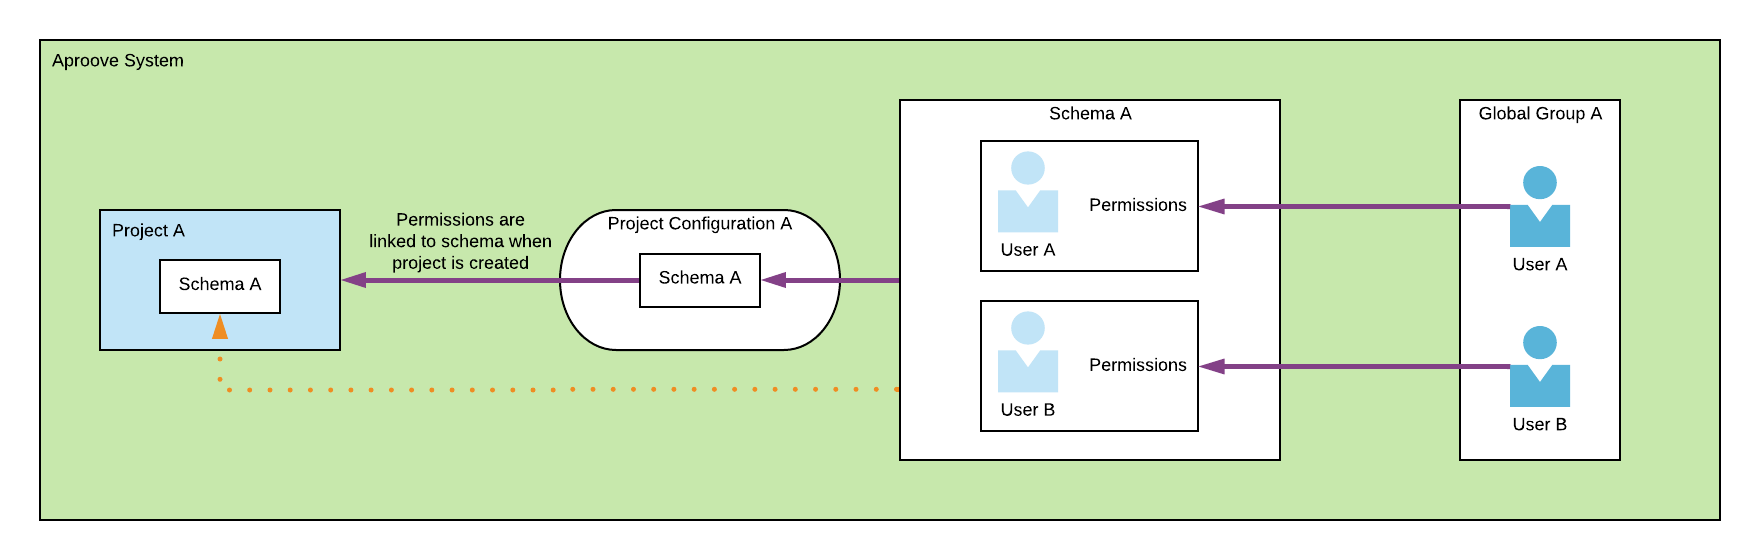 Schema Permissions Global Groups